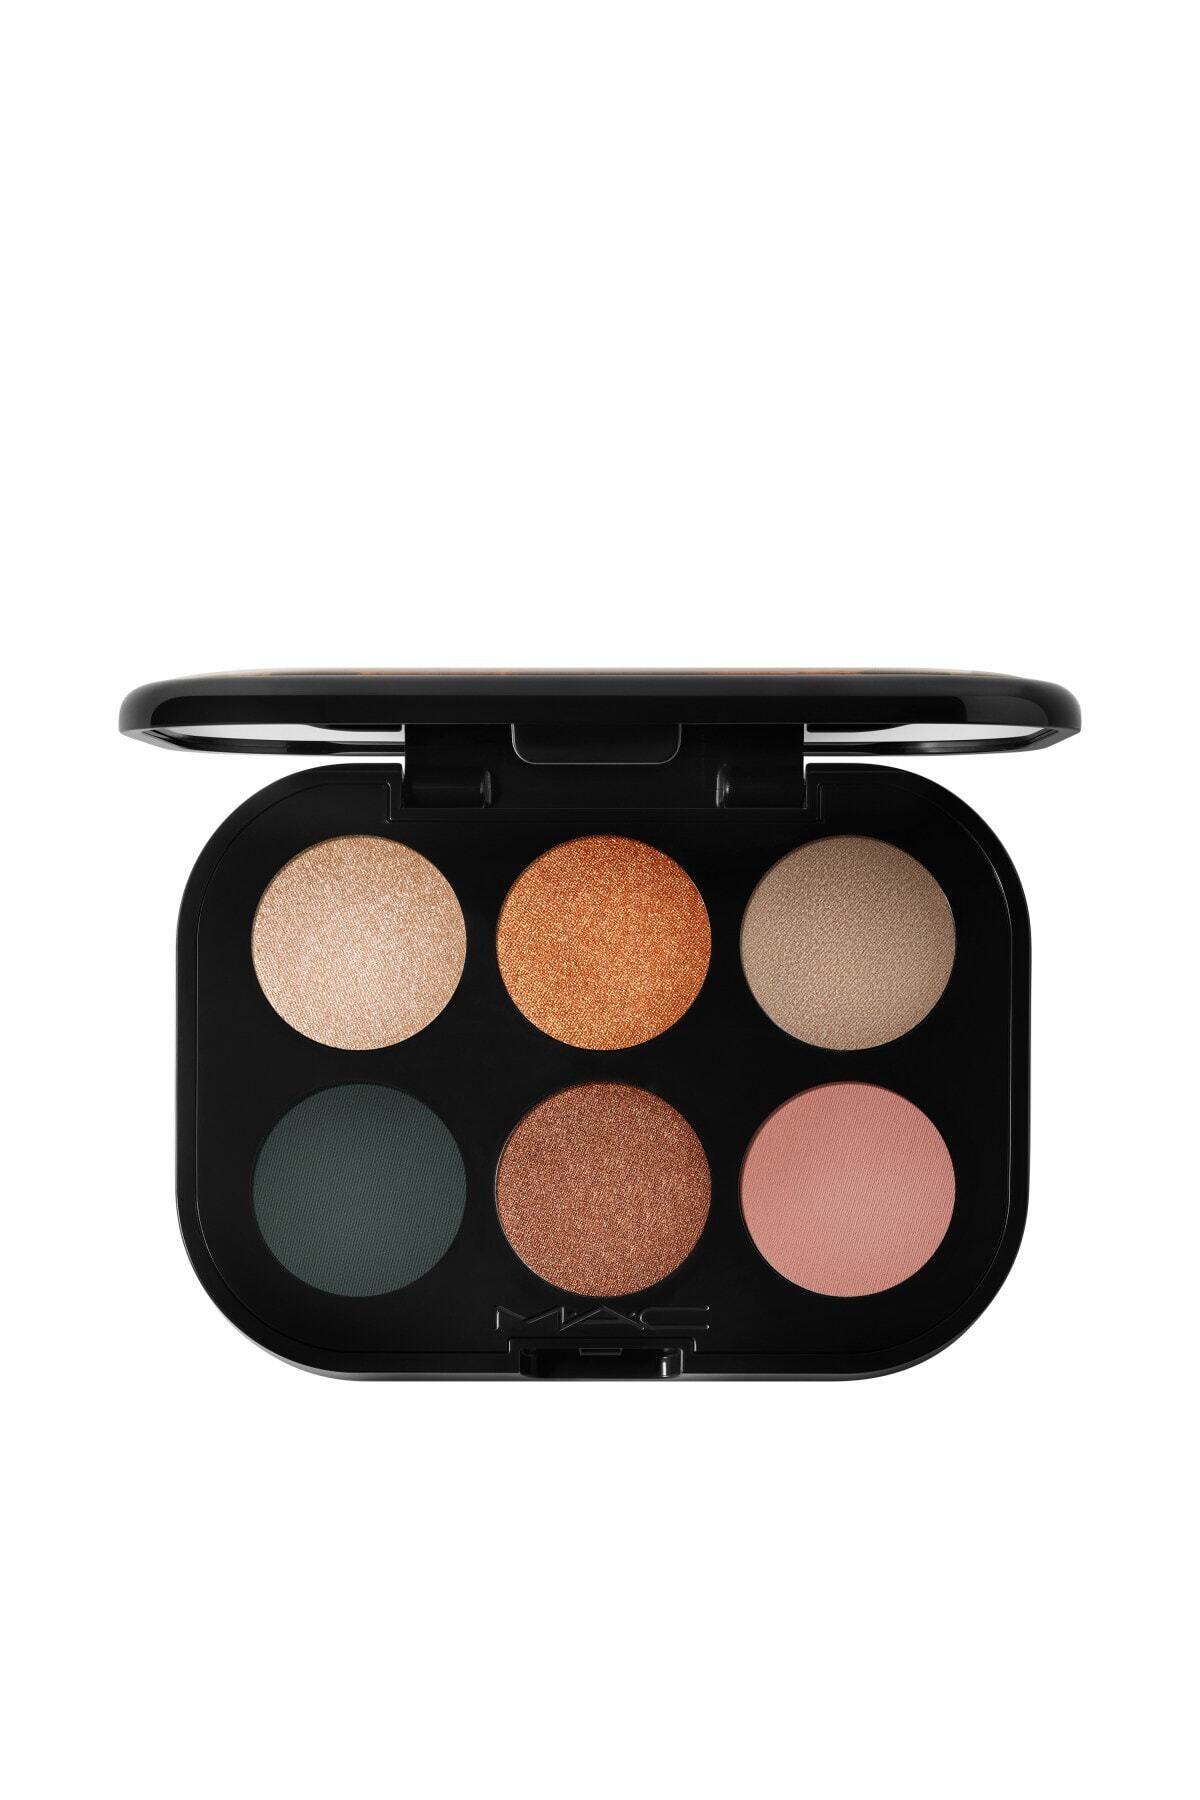 Mac Connect In Colour Eye Shadow Palette-bronze Influence-	6.25 G-773602648702